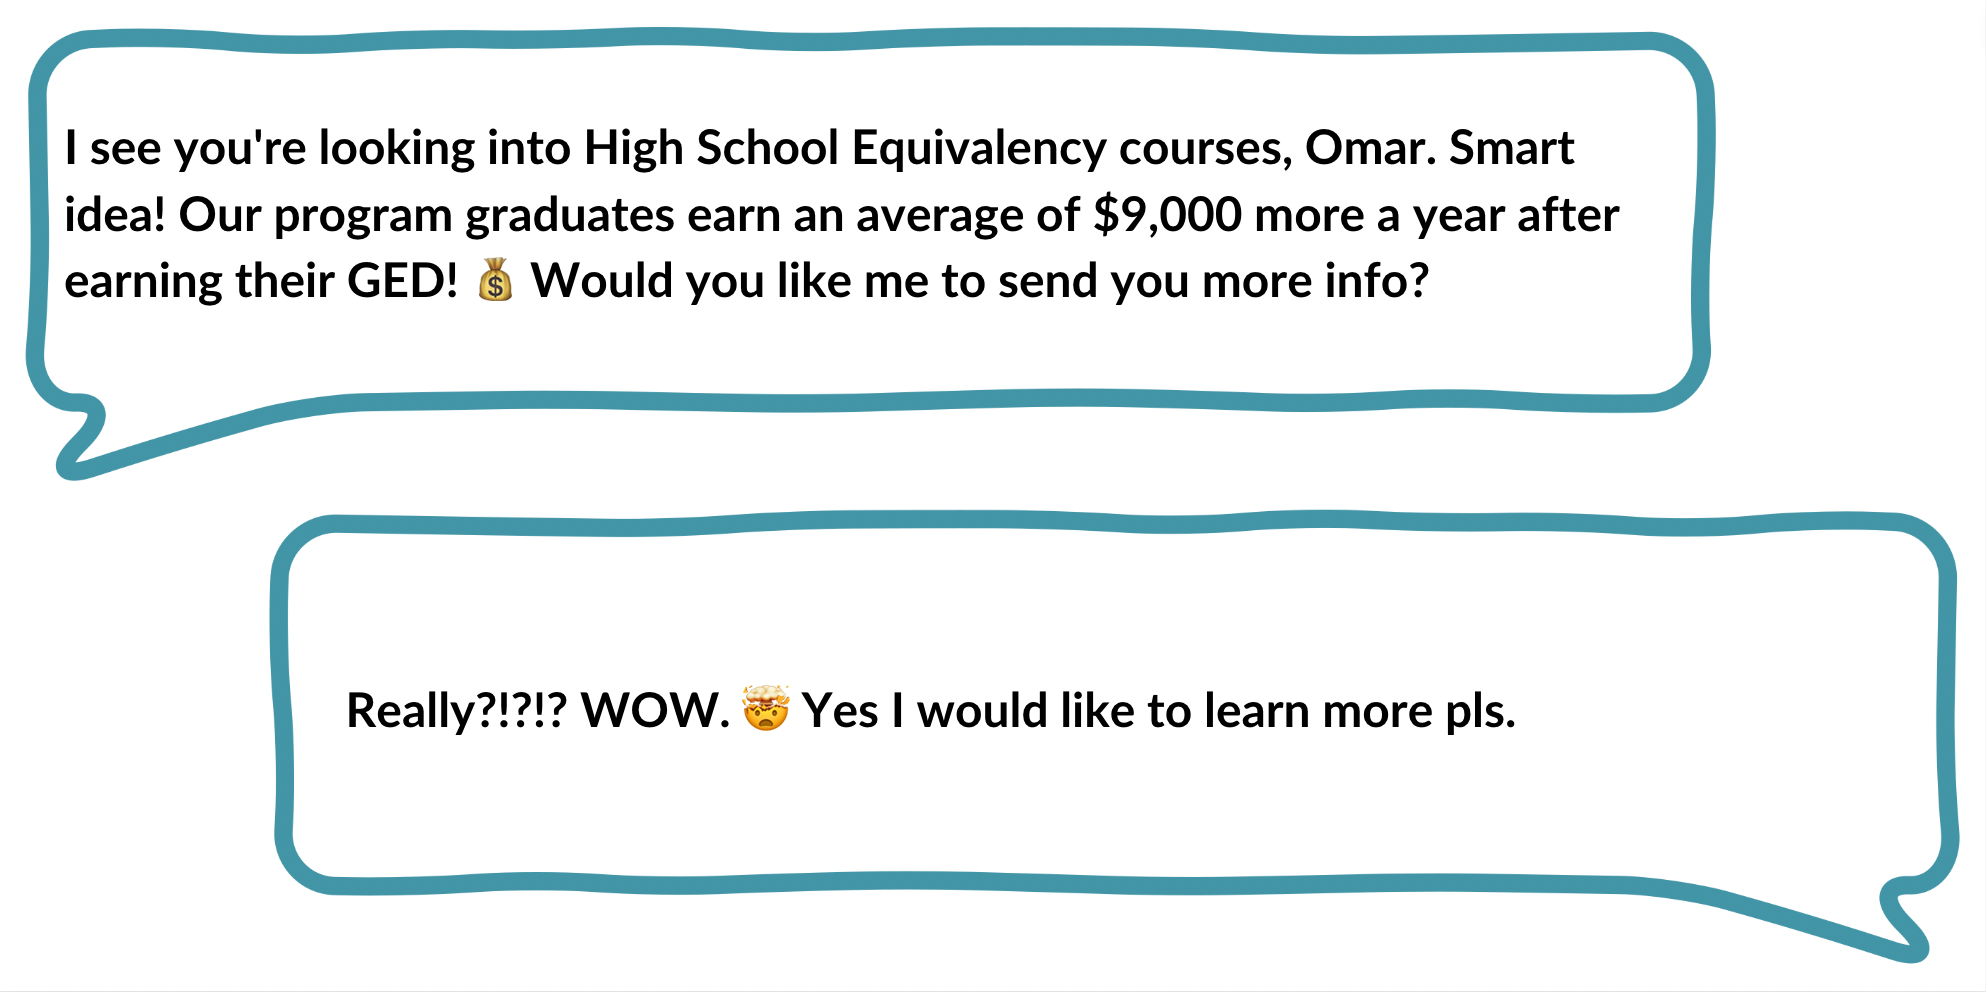 two text bubbles - the first says "I see you're looking into High School Equivalency courses, Omar. Smart idea! Our program graduates earn an average of $9,000 more a year after earning their GED! Would you like me to send you more info?" and the second says "Really?!?!? WOW. Yes I would like to learn more pls."